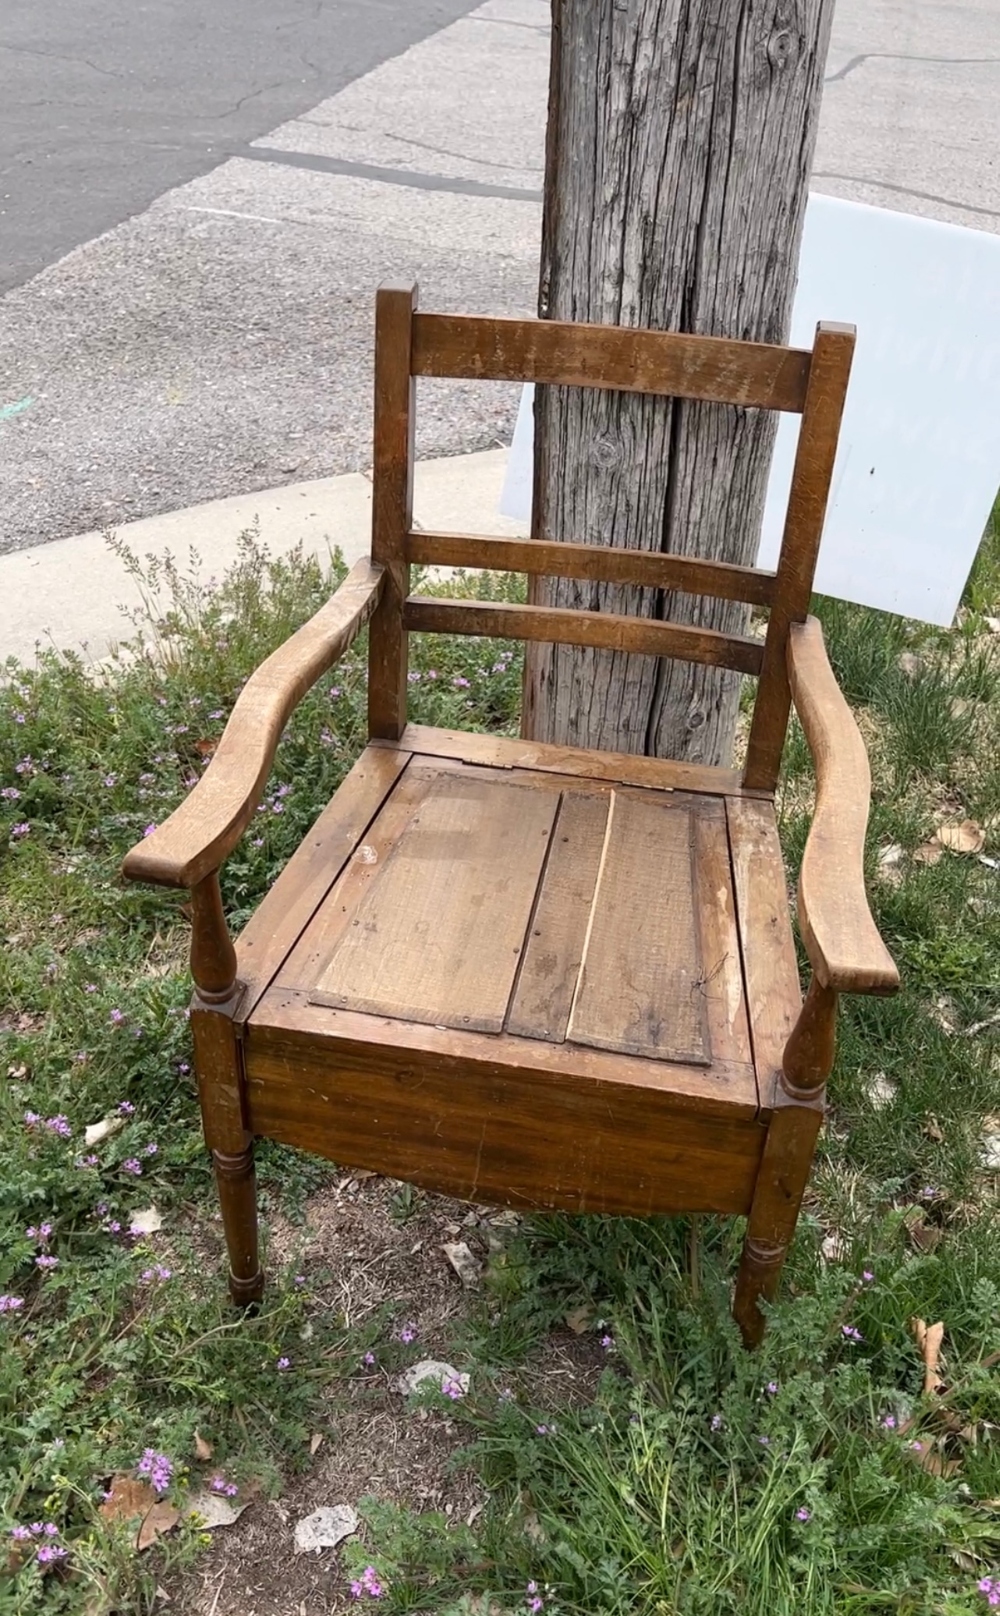 Spring DIY Upcycled Chair Planter. Take a broken chair and give it new life by planting beautiful flowers in it to enjoy in your yard!